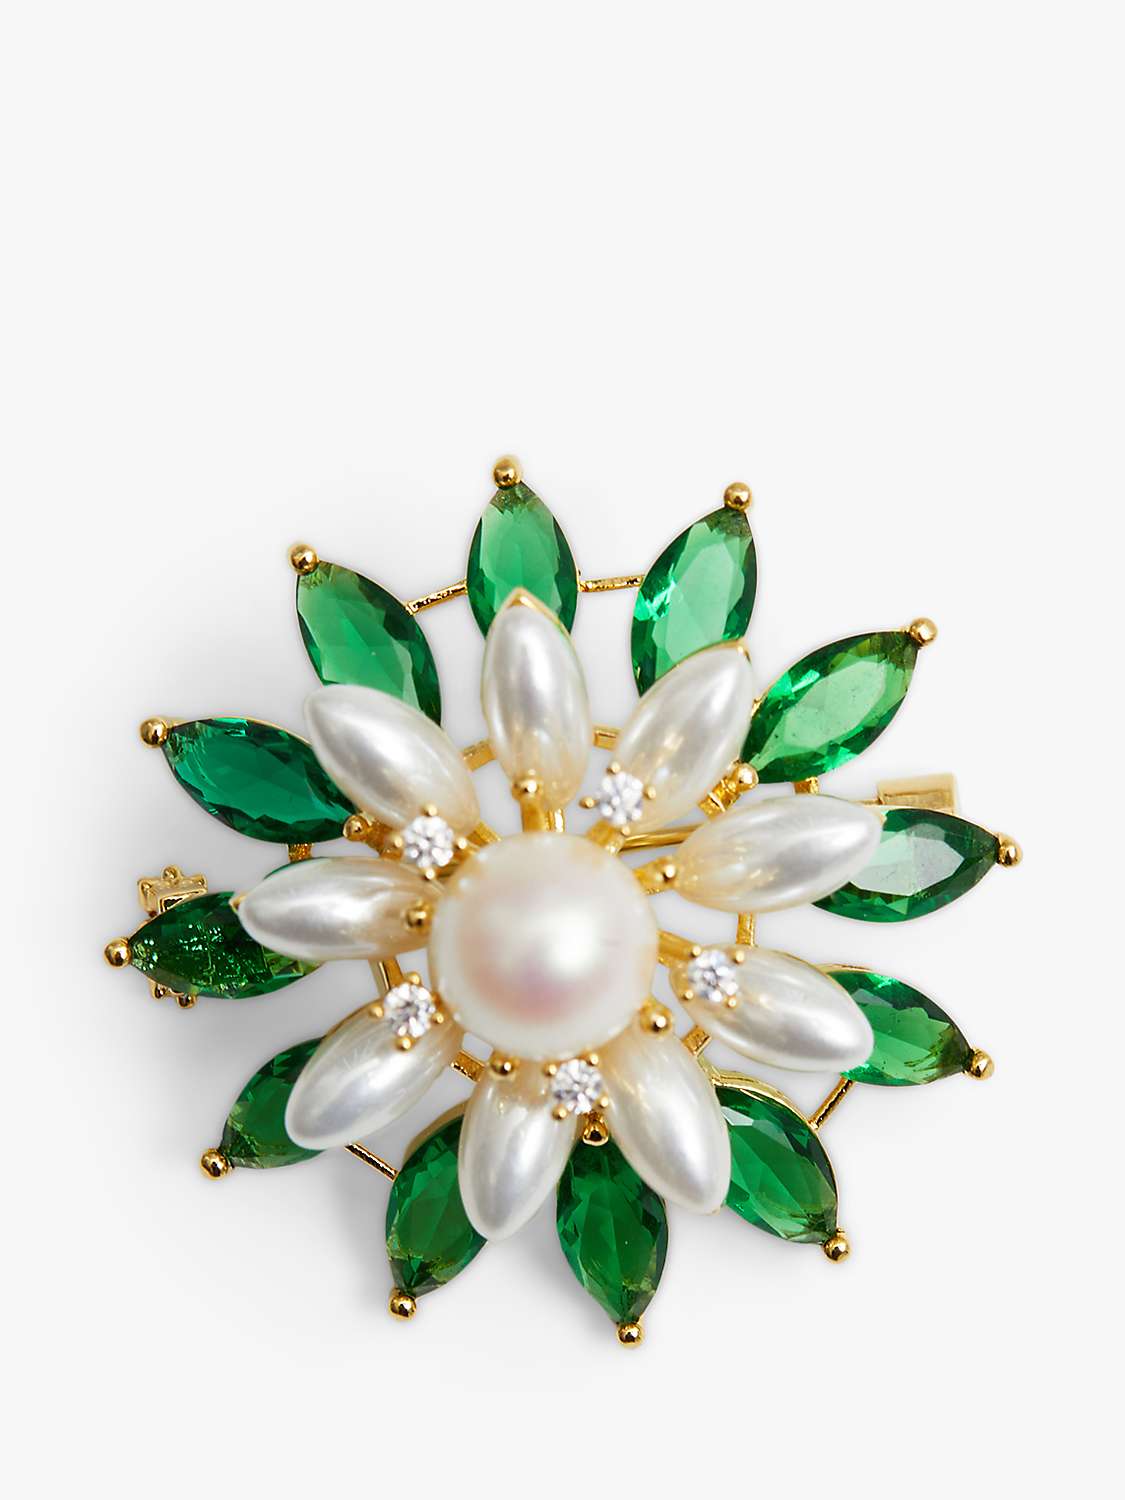 Buy Jon Richard Gold Plated Emerald And Pearl Floral Brooch, Gold Online at johnlewis.com